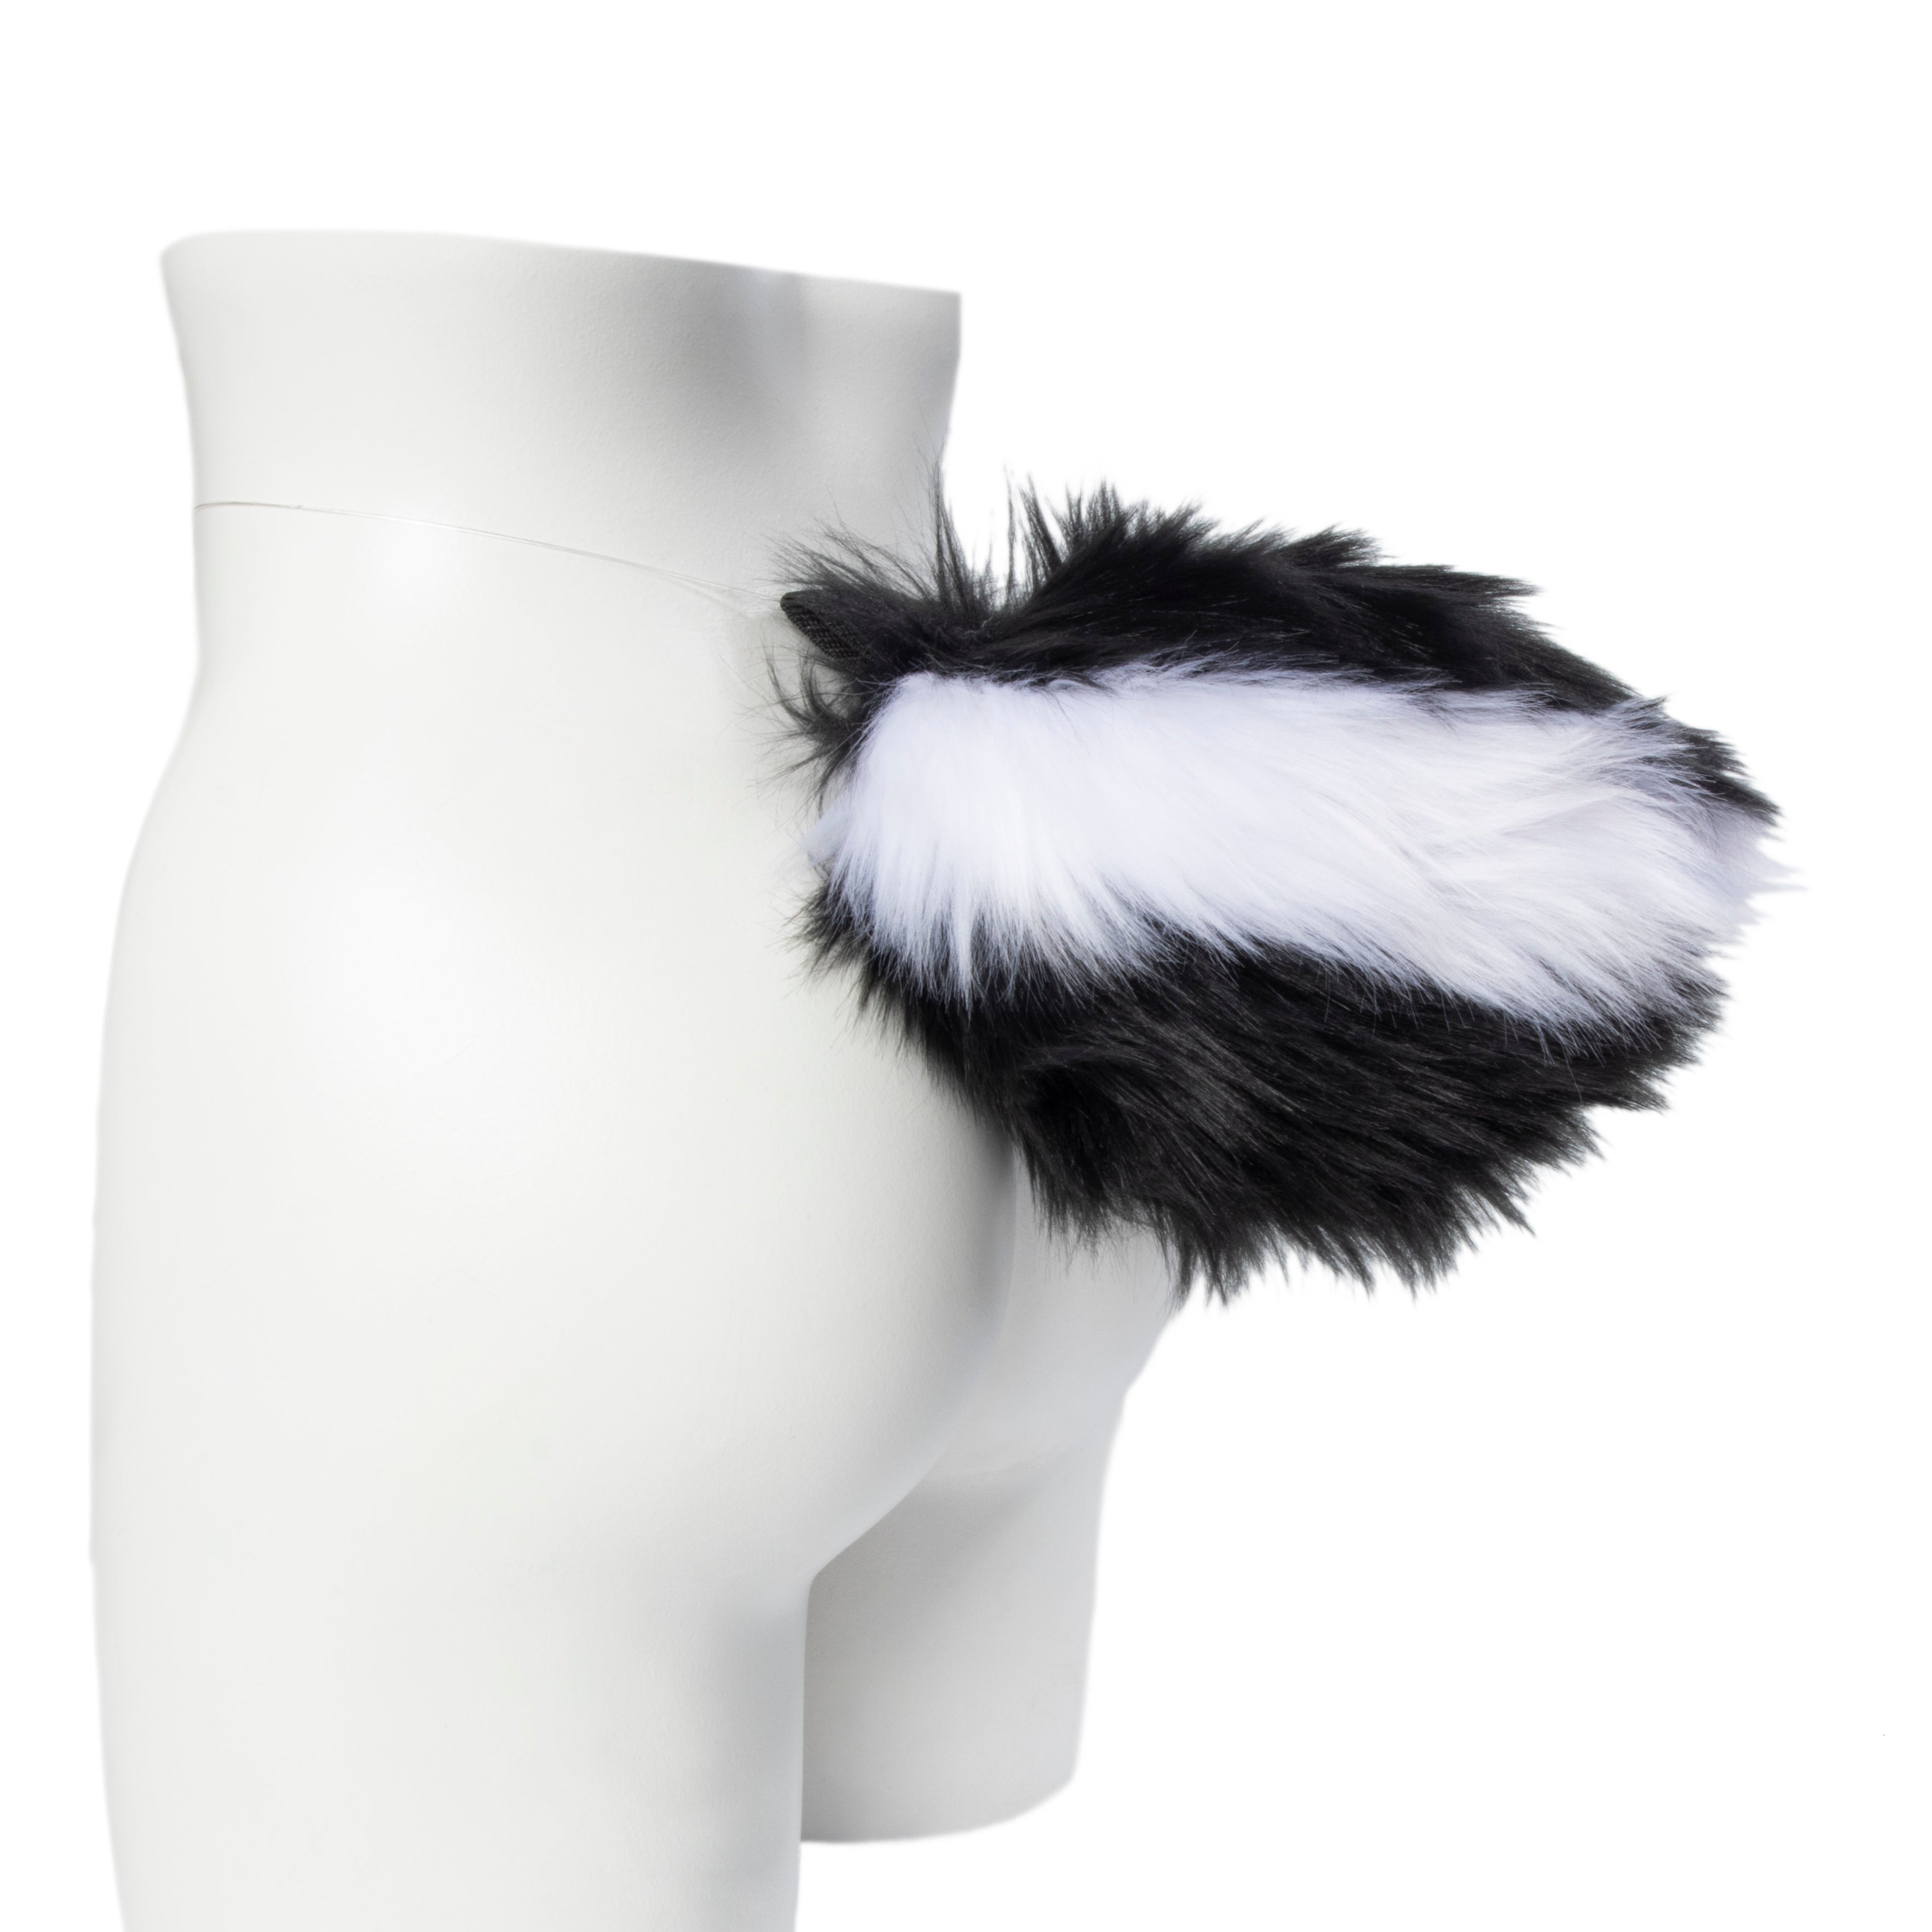 white and black Pawstar Bunny Plus Tail. Faux fur furry rabbit costume tail.